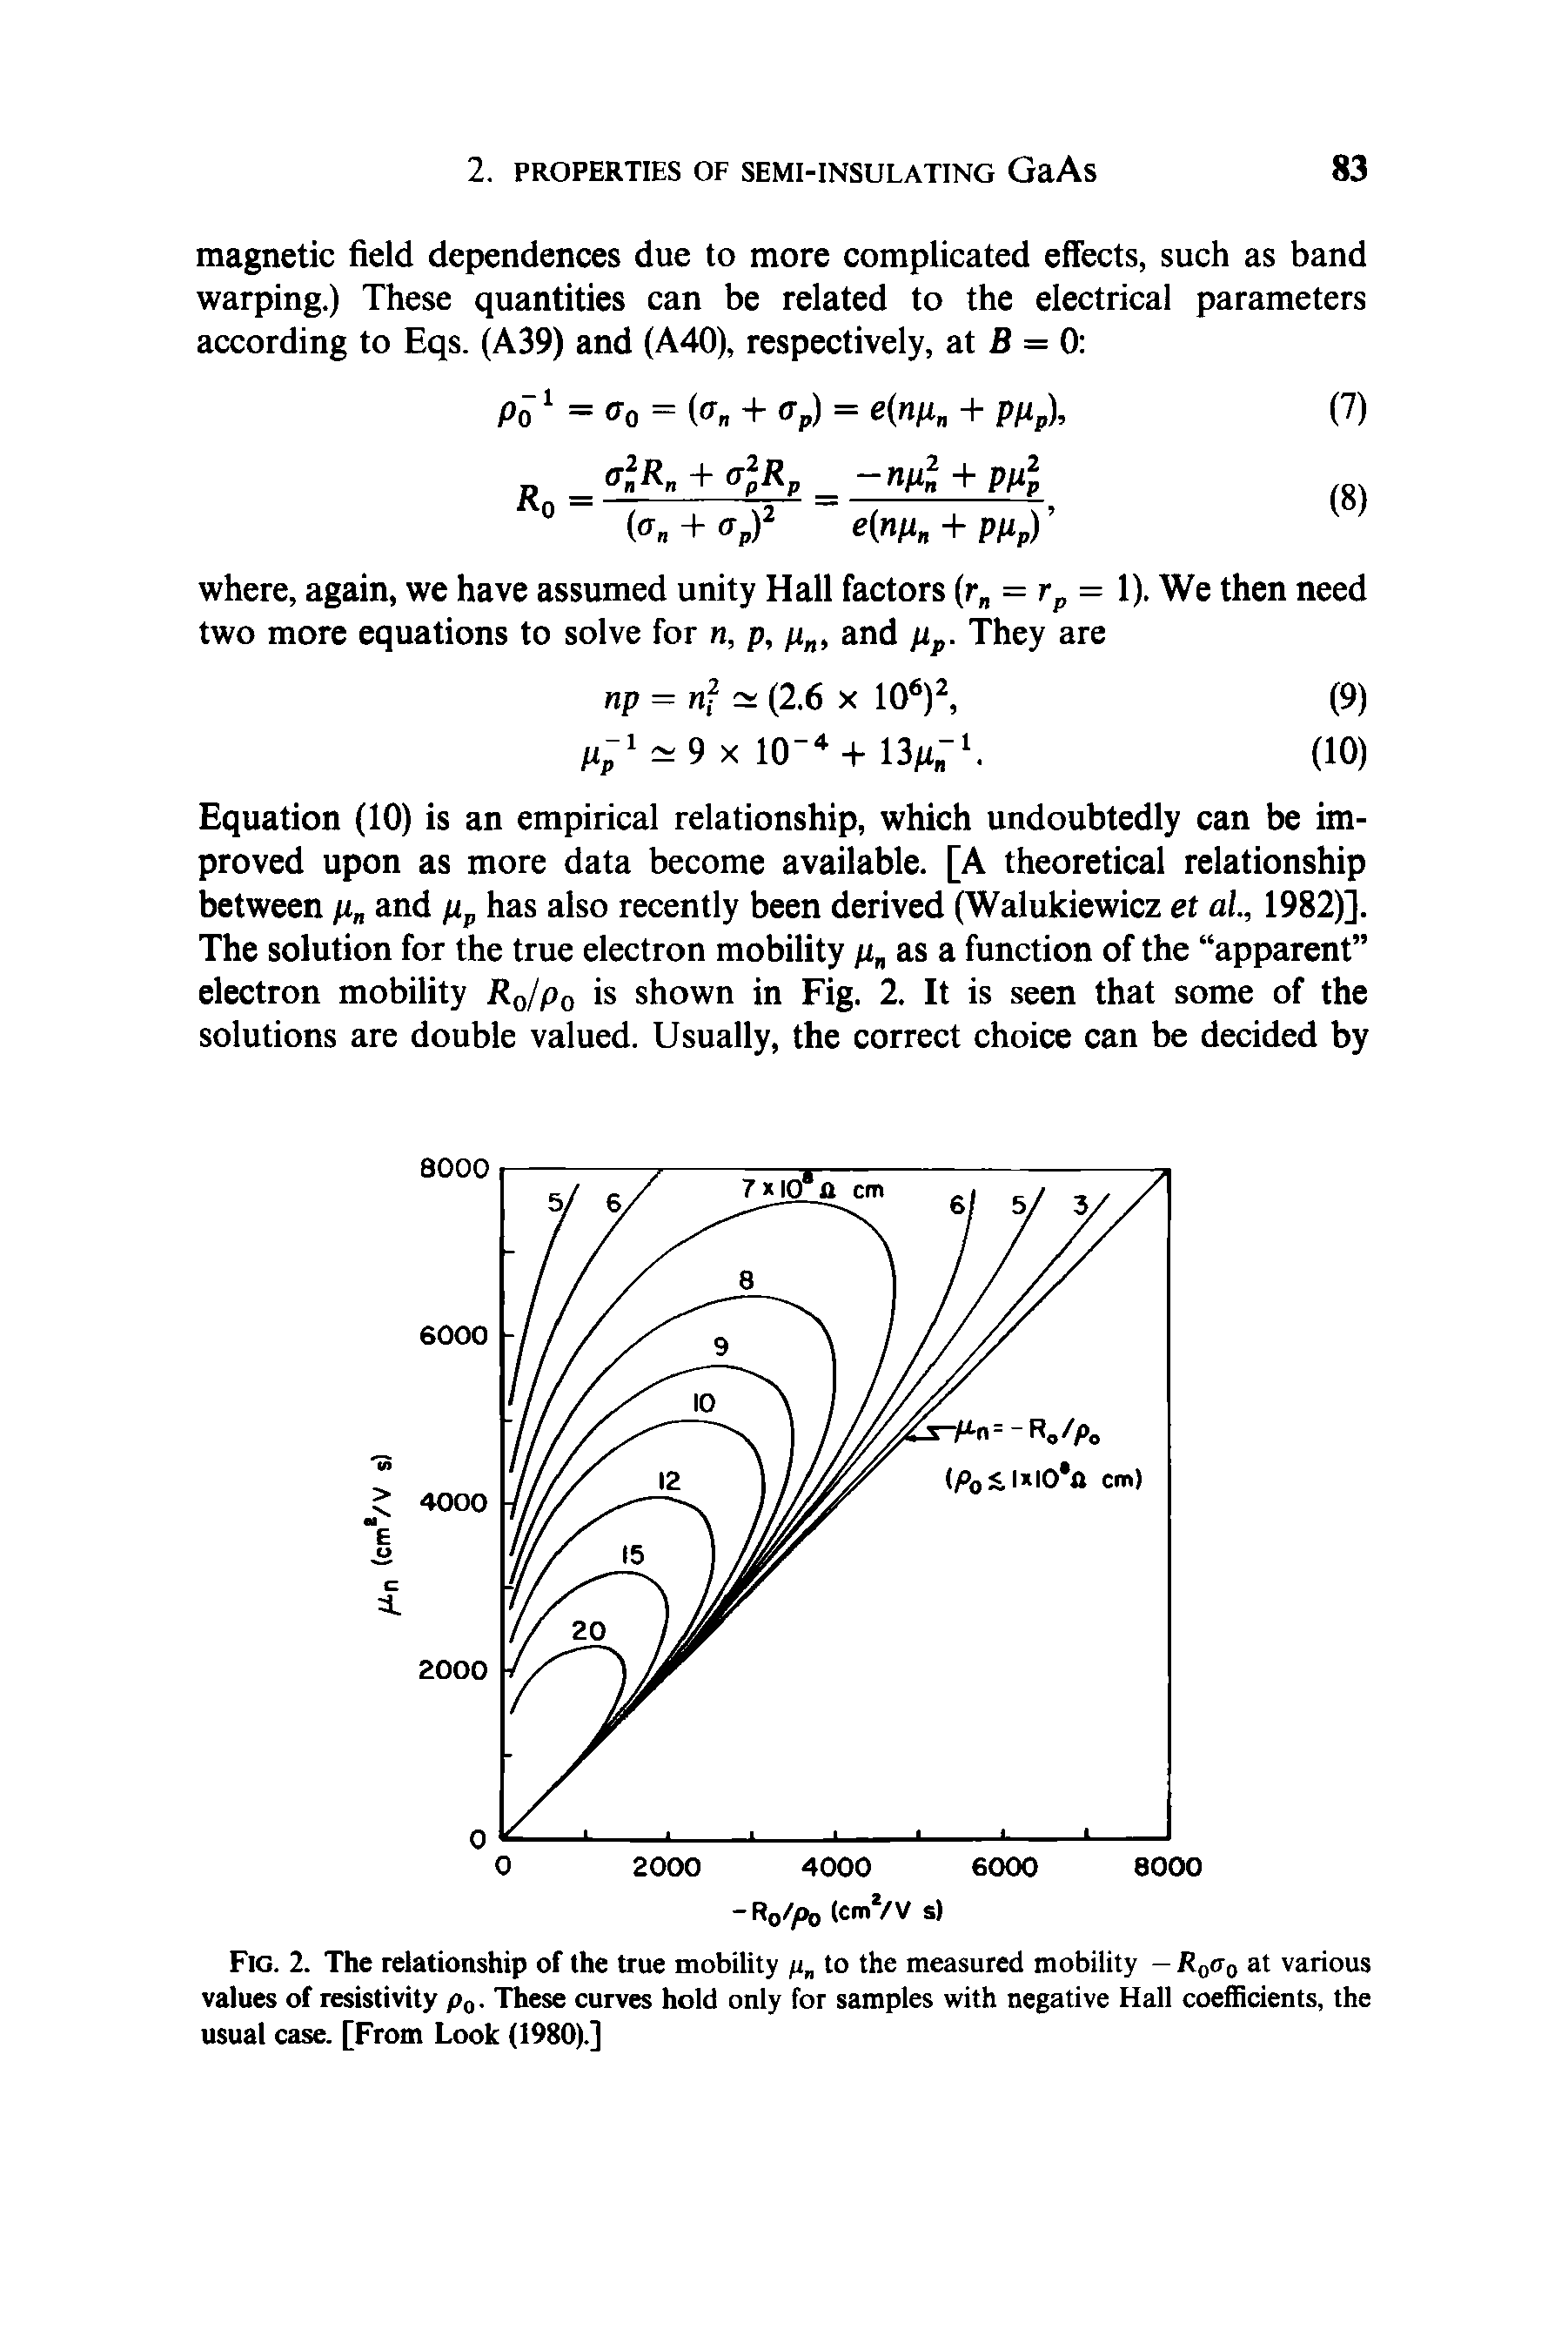 Fig. 2. The relationship of the true mobility ft to the measured mobility — R0a0 at various values of resistivity p0. These curves hold only for samples with negative Hall coefficients, the usual case. [From Look (1980).]...